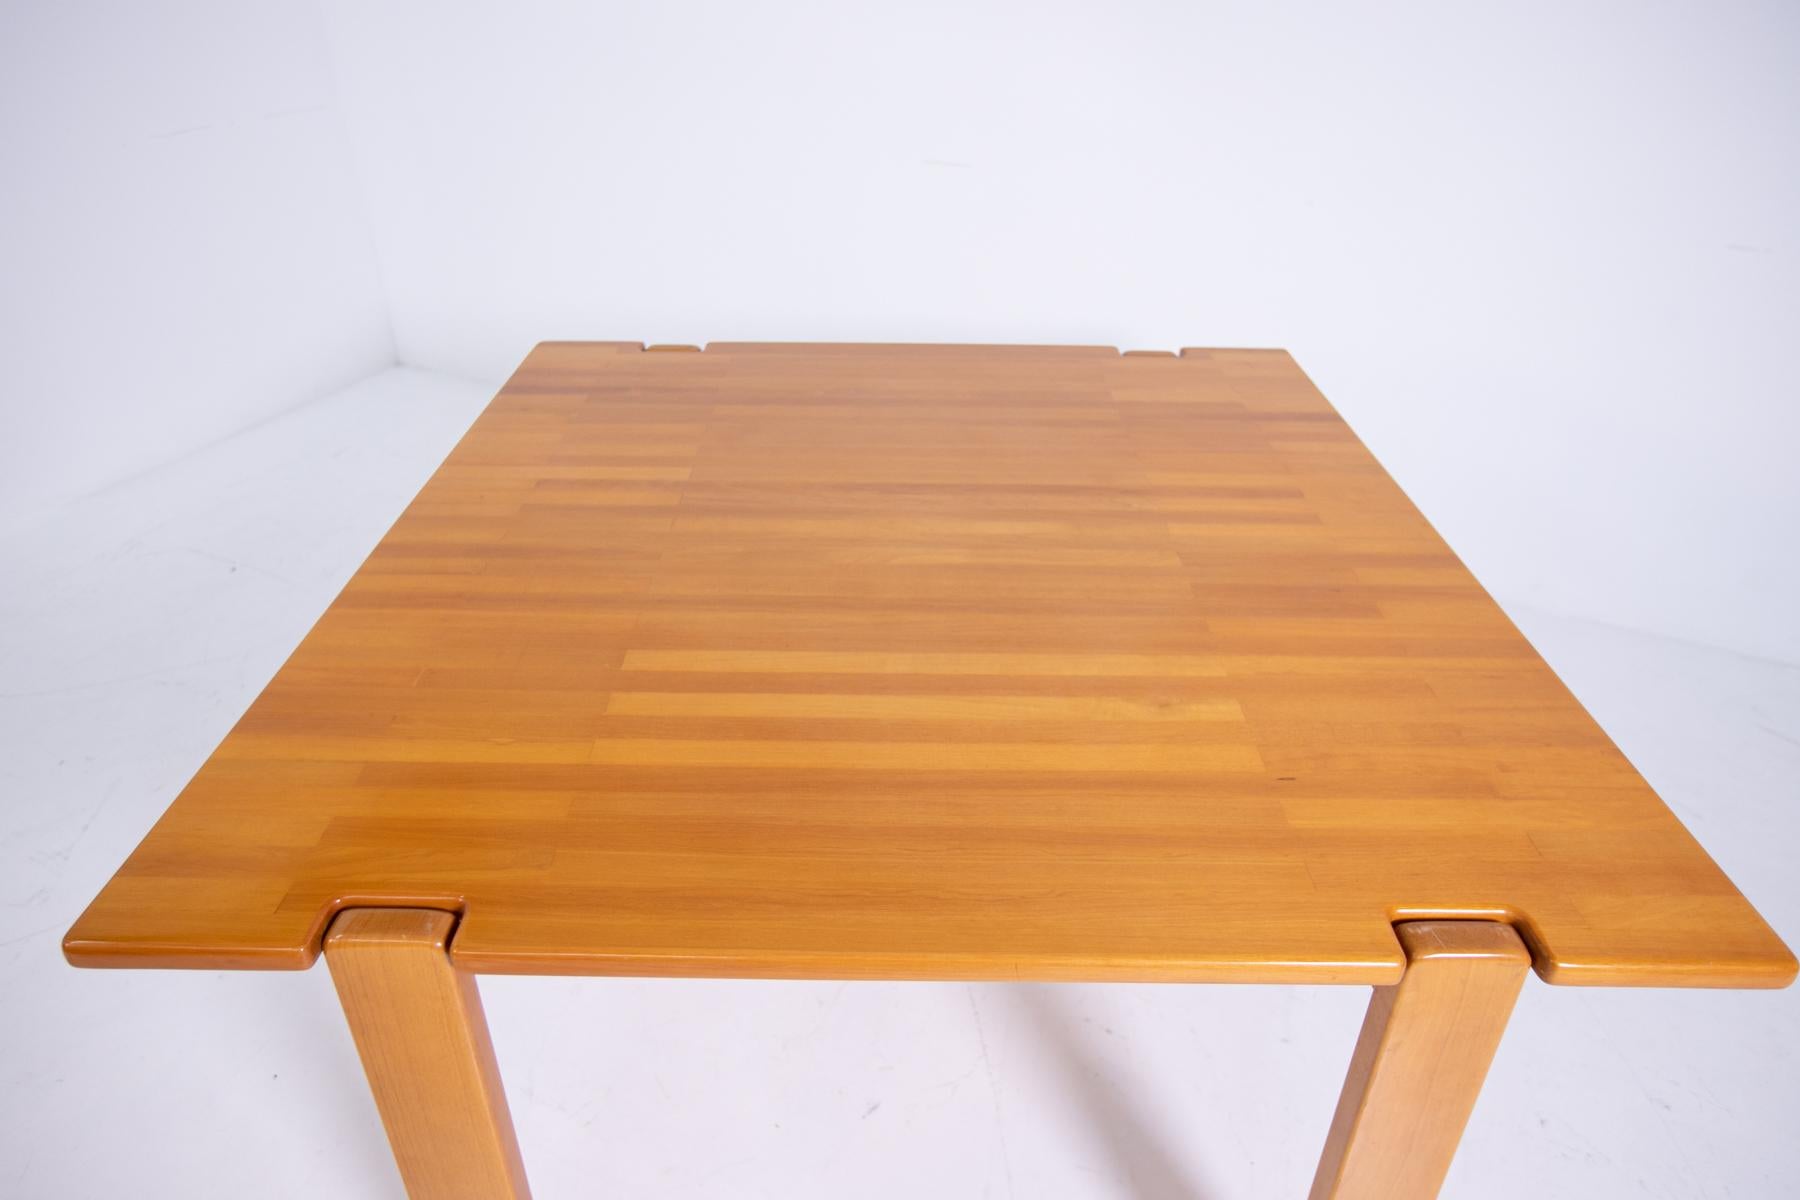 Beautiful square shaped dining table from 1970 designed by Bianchin Afra and Tobia Scarpa, Italian architects, restorers and designers.
The Afra and Tobia Scarpa dining table was made of fine wood with planking technique.
It is characterized by its